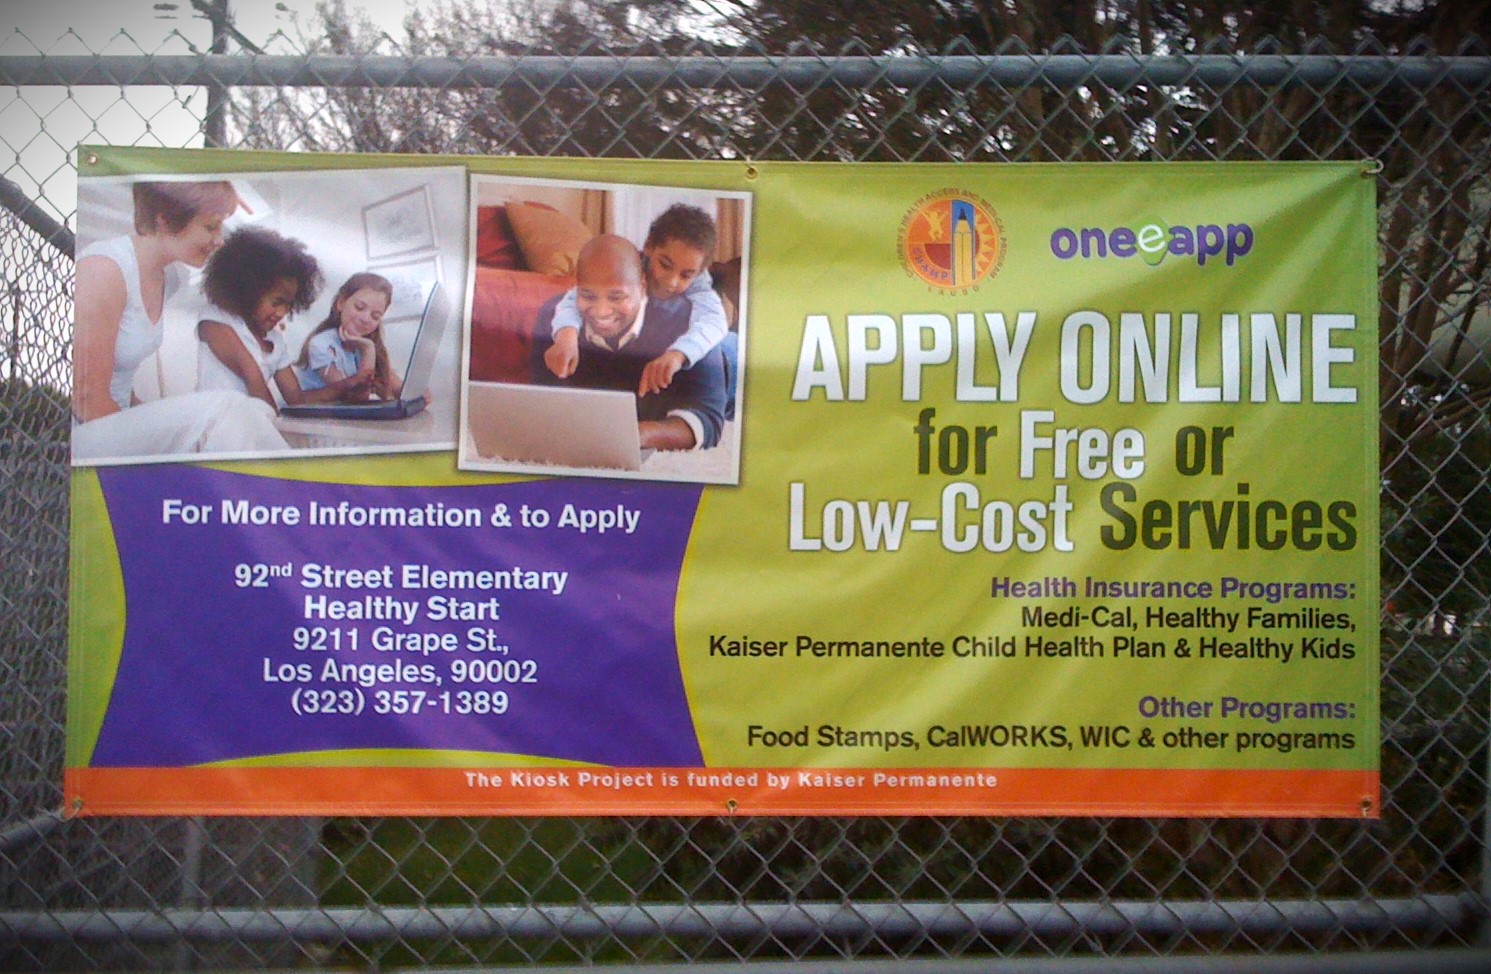 A large banner on a chain-link fence has images of children and adults looking at a computers and smiling. The headline reads, "One-e-App, Apply online for Free or Low-Cost Services." The subheading reads, " Health insurance programs; Medi-Cal, Healthy Families, Kaiser Permanente Child Health Plan & Health Kids. Below that it reads: Other programs: Food Stamps, CalWORKS, WIC, and other programs. On the left side of the banner, it says "For more information and apply..." and provides an address for an elementary school in Los Angeles." This is an old banner advertising the recently shut down app One-e-App